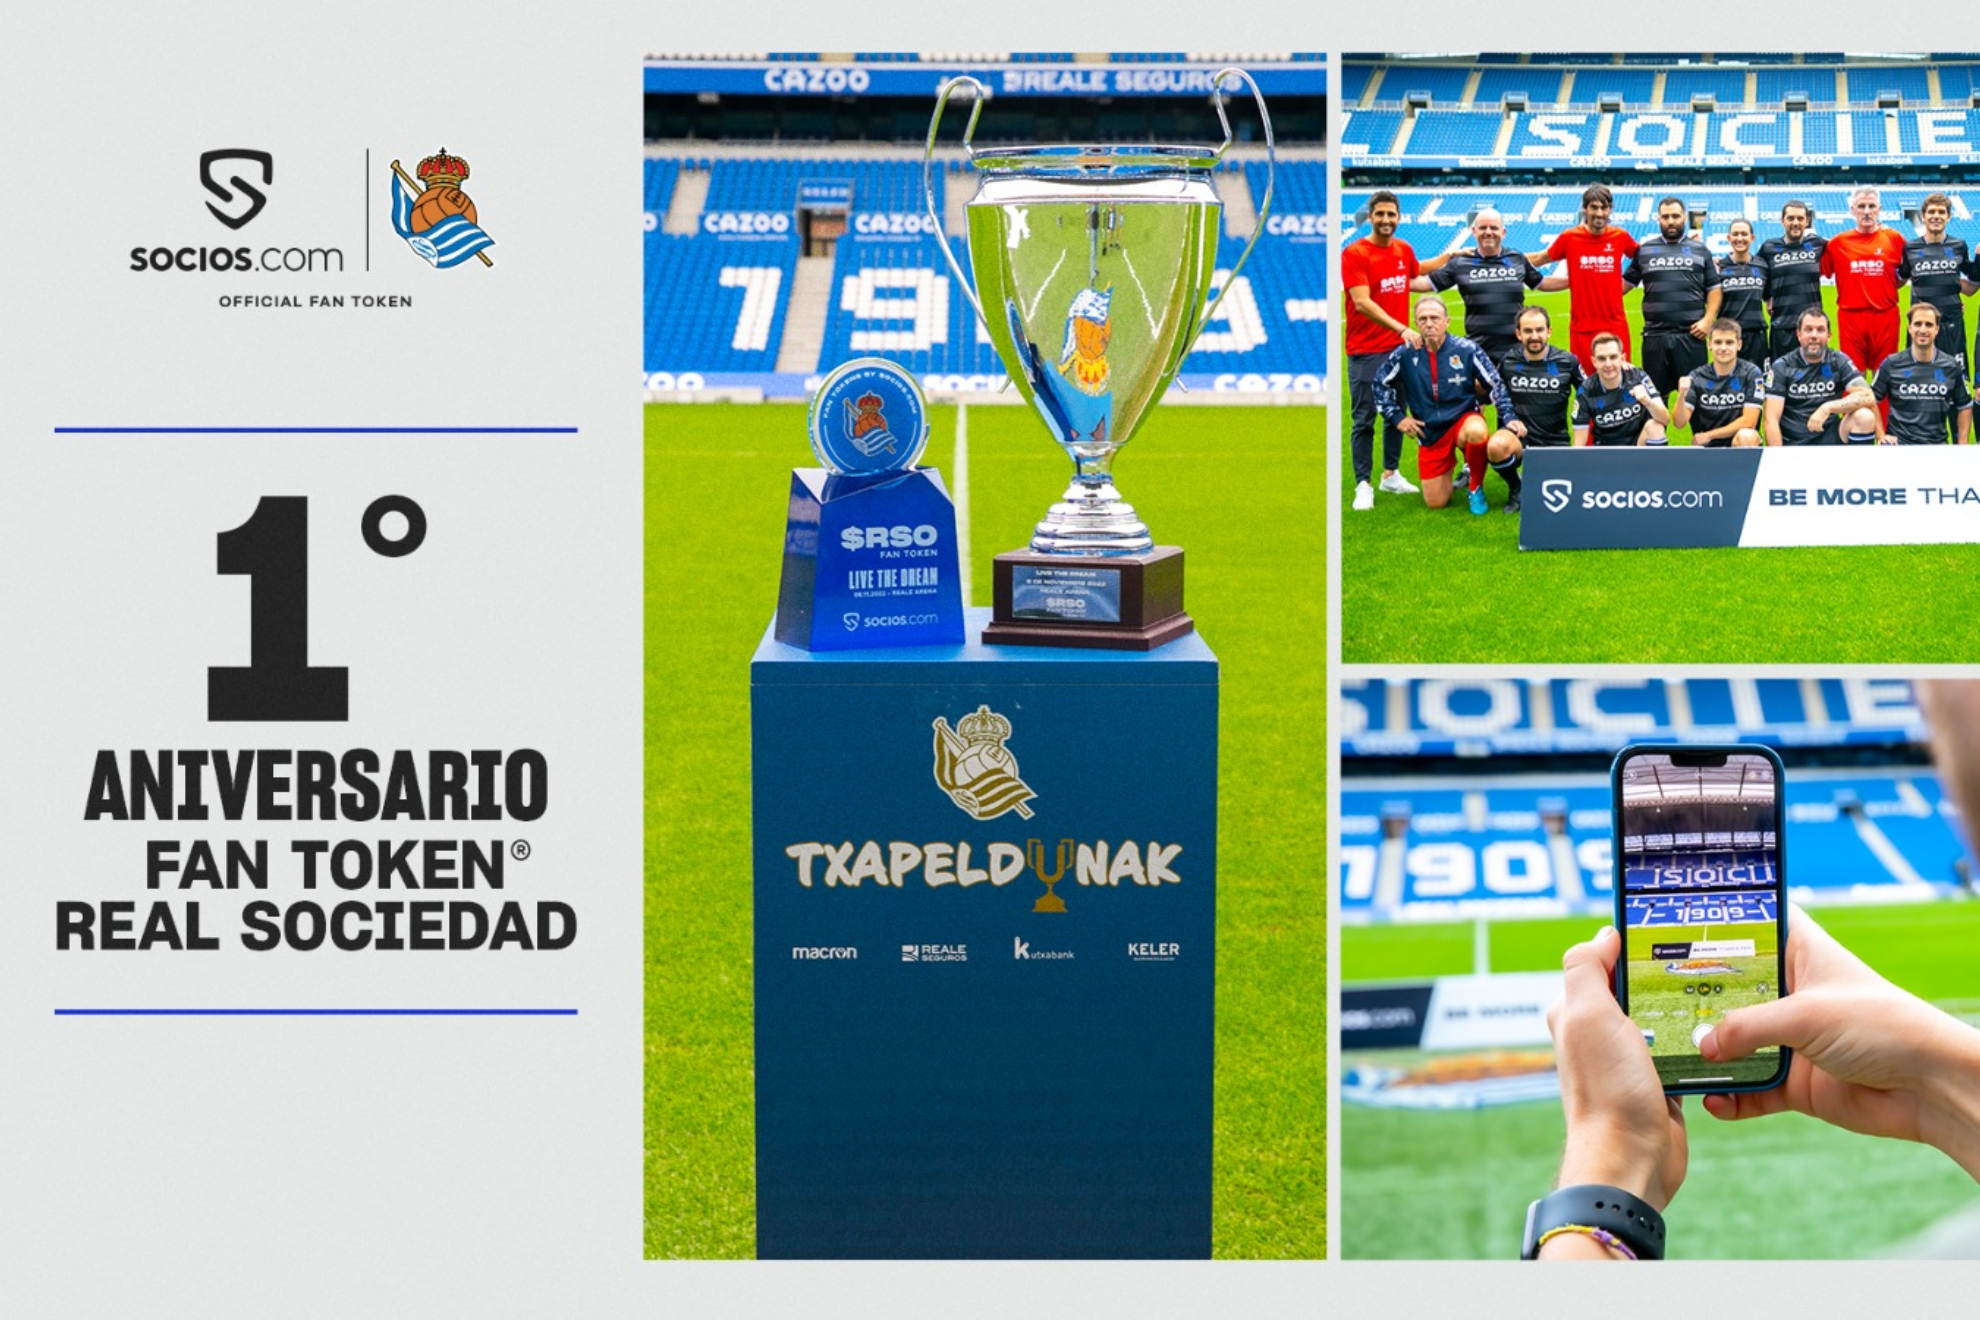 Real Sociedad Fan Token holders grow by 40 percent one year after the launch of its Fan Token